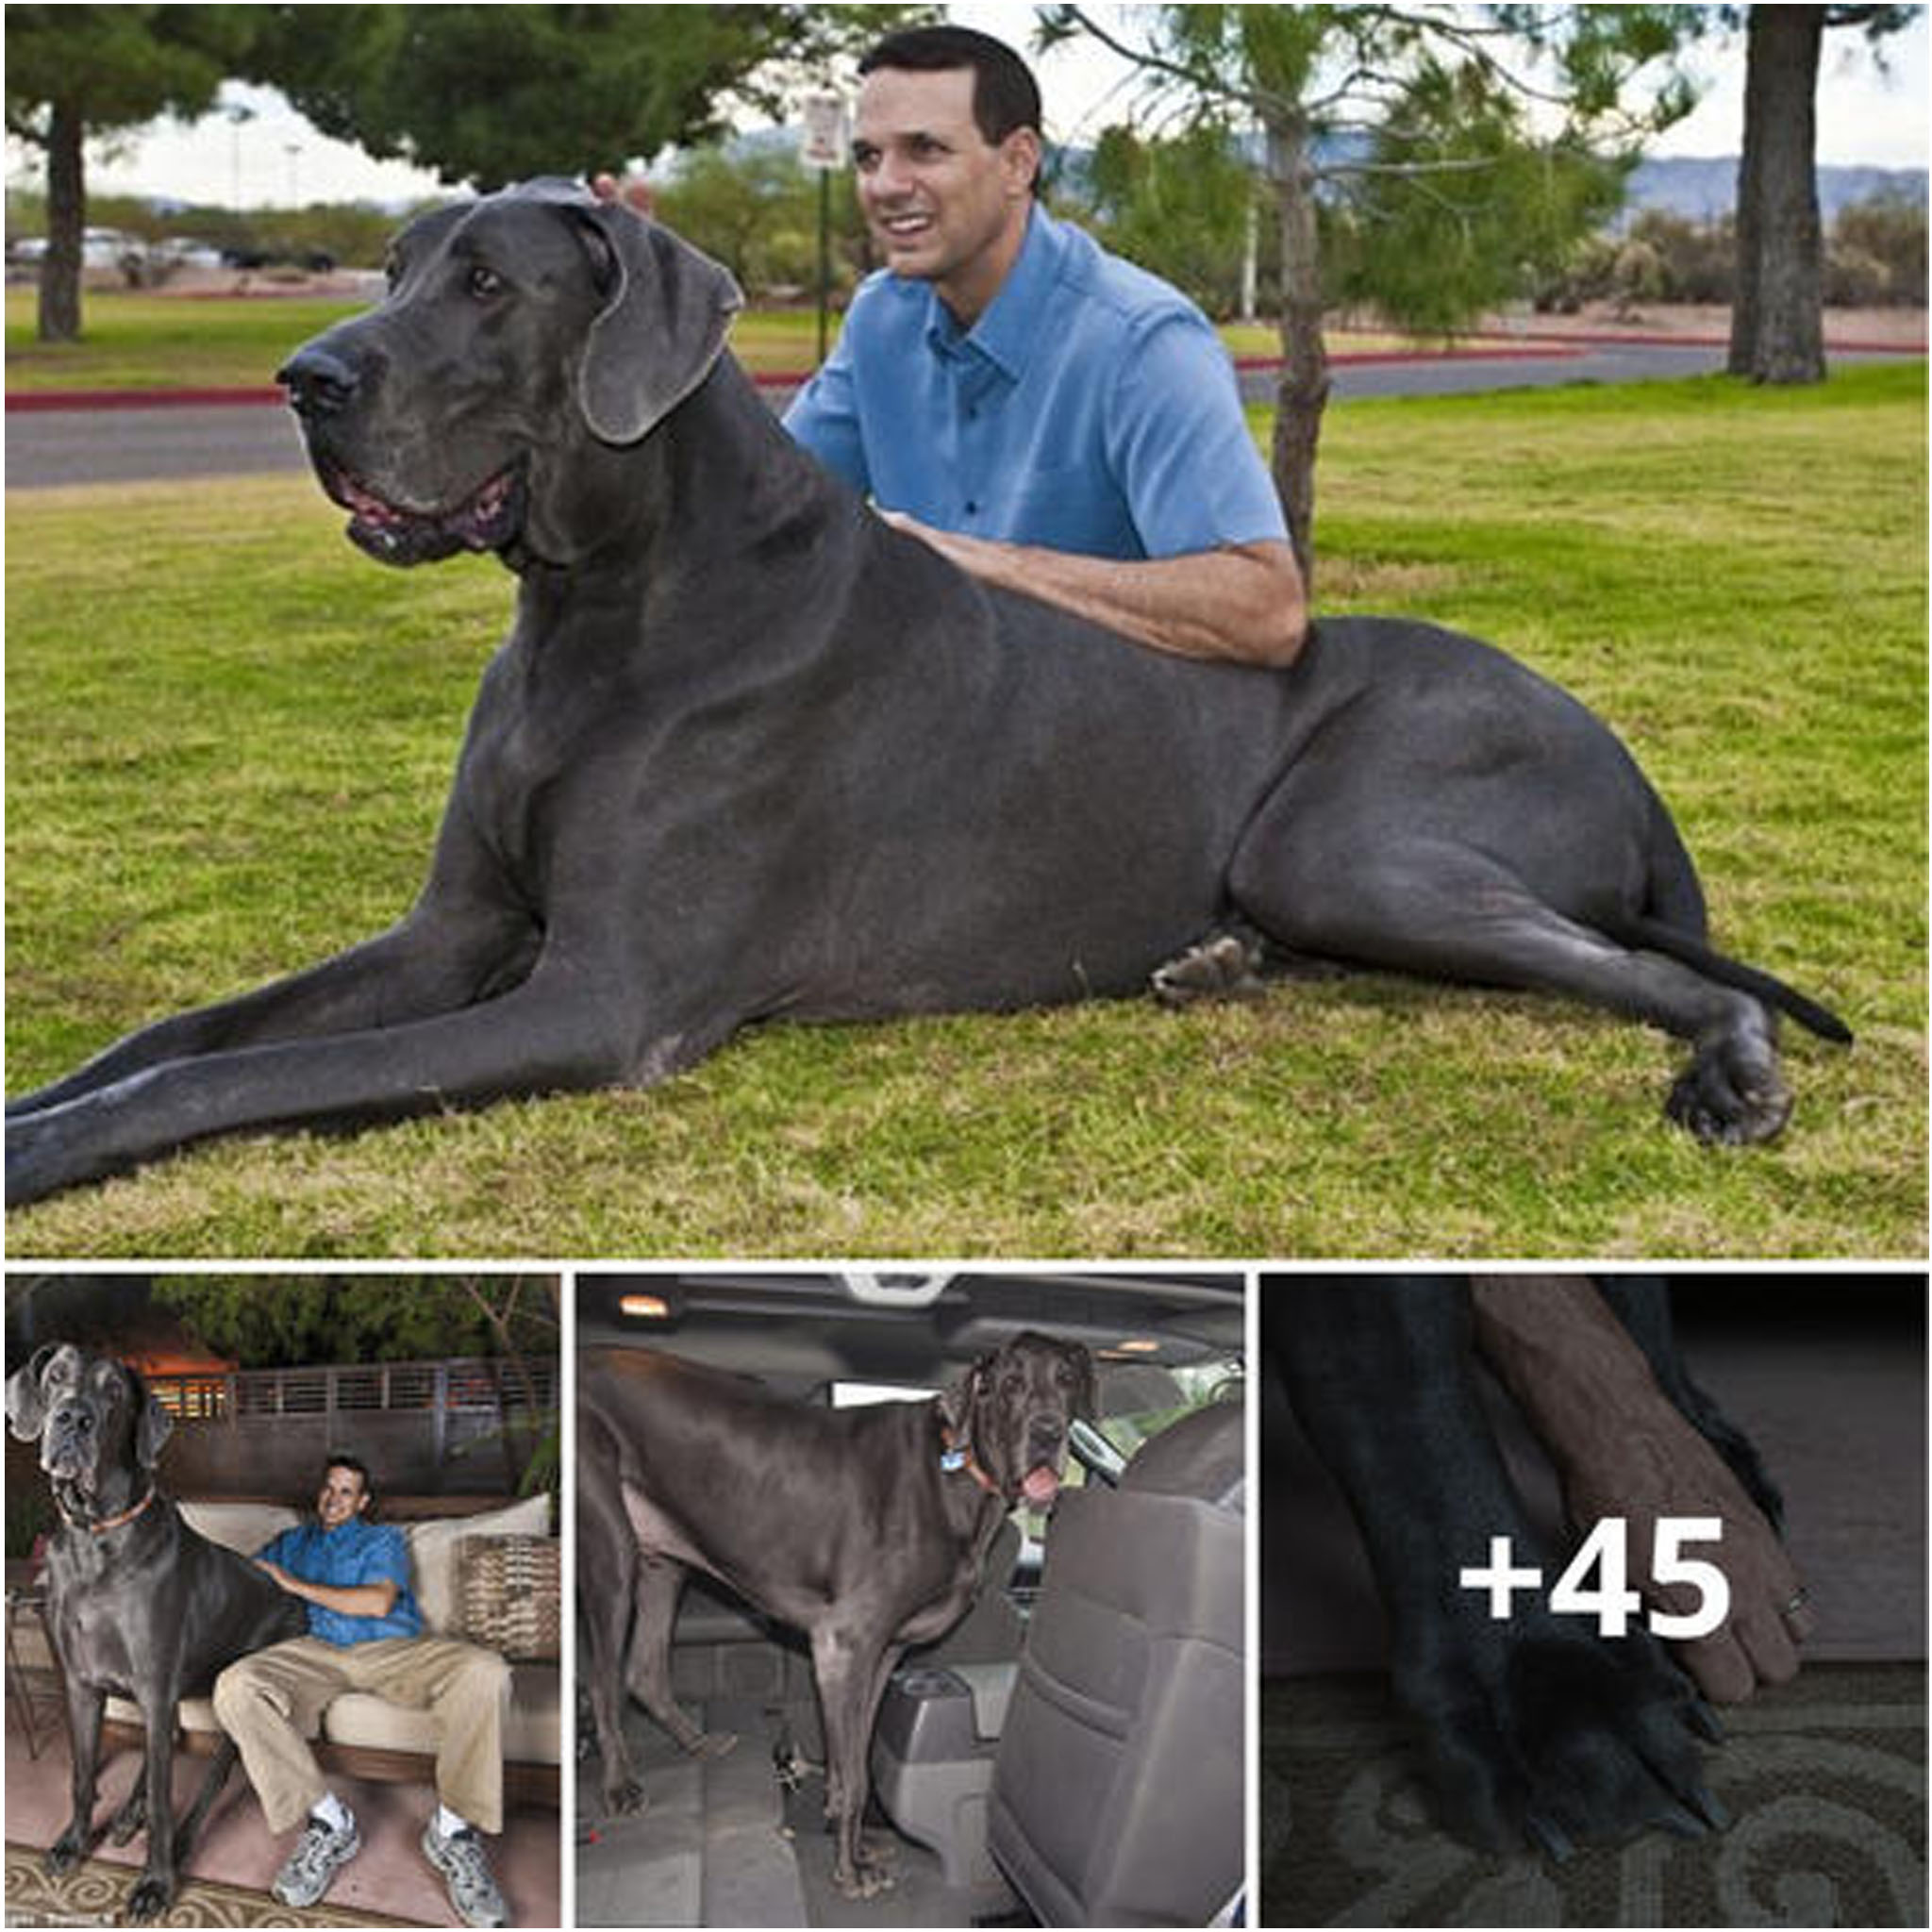 tho “Meet ‘Colossal Canine’: A 7-Foot-Long Blue Great Dane Potentially Claiming the Title of World’s Tallest Dog, Surprising Everyone” tho